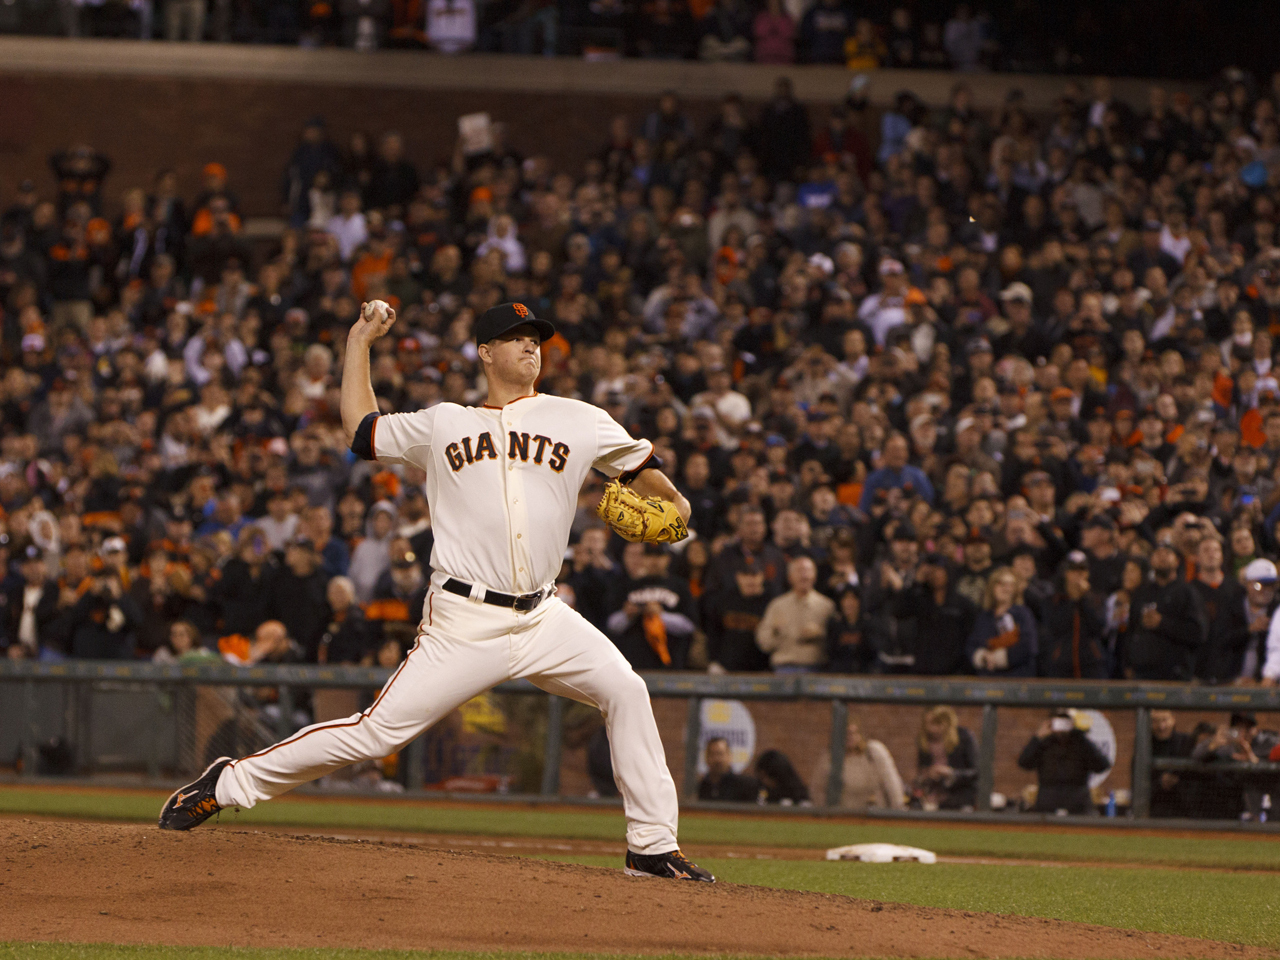 Matt Cain gem gives Giants a perfect game at last